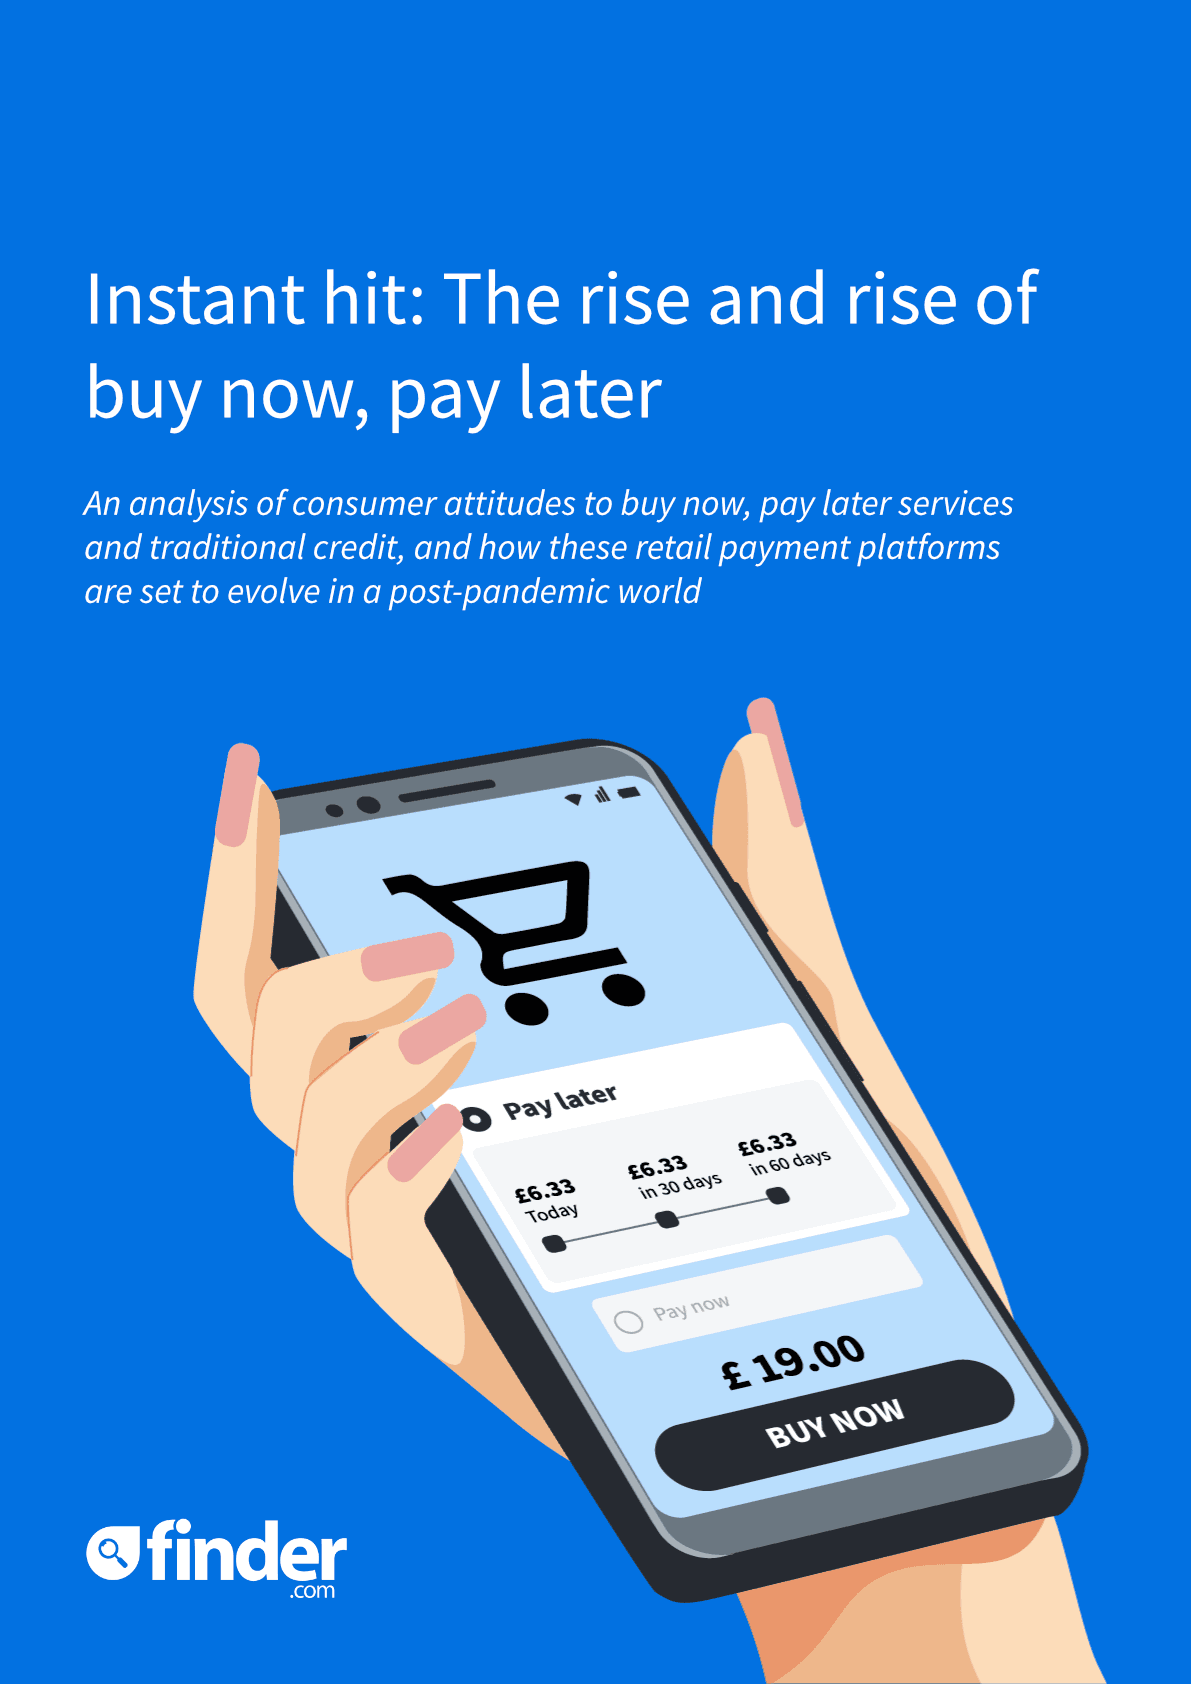 Buy now, pay later providers available in the UK